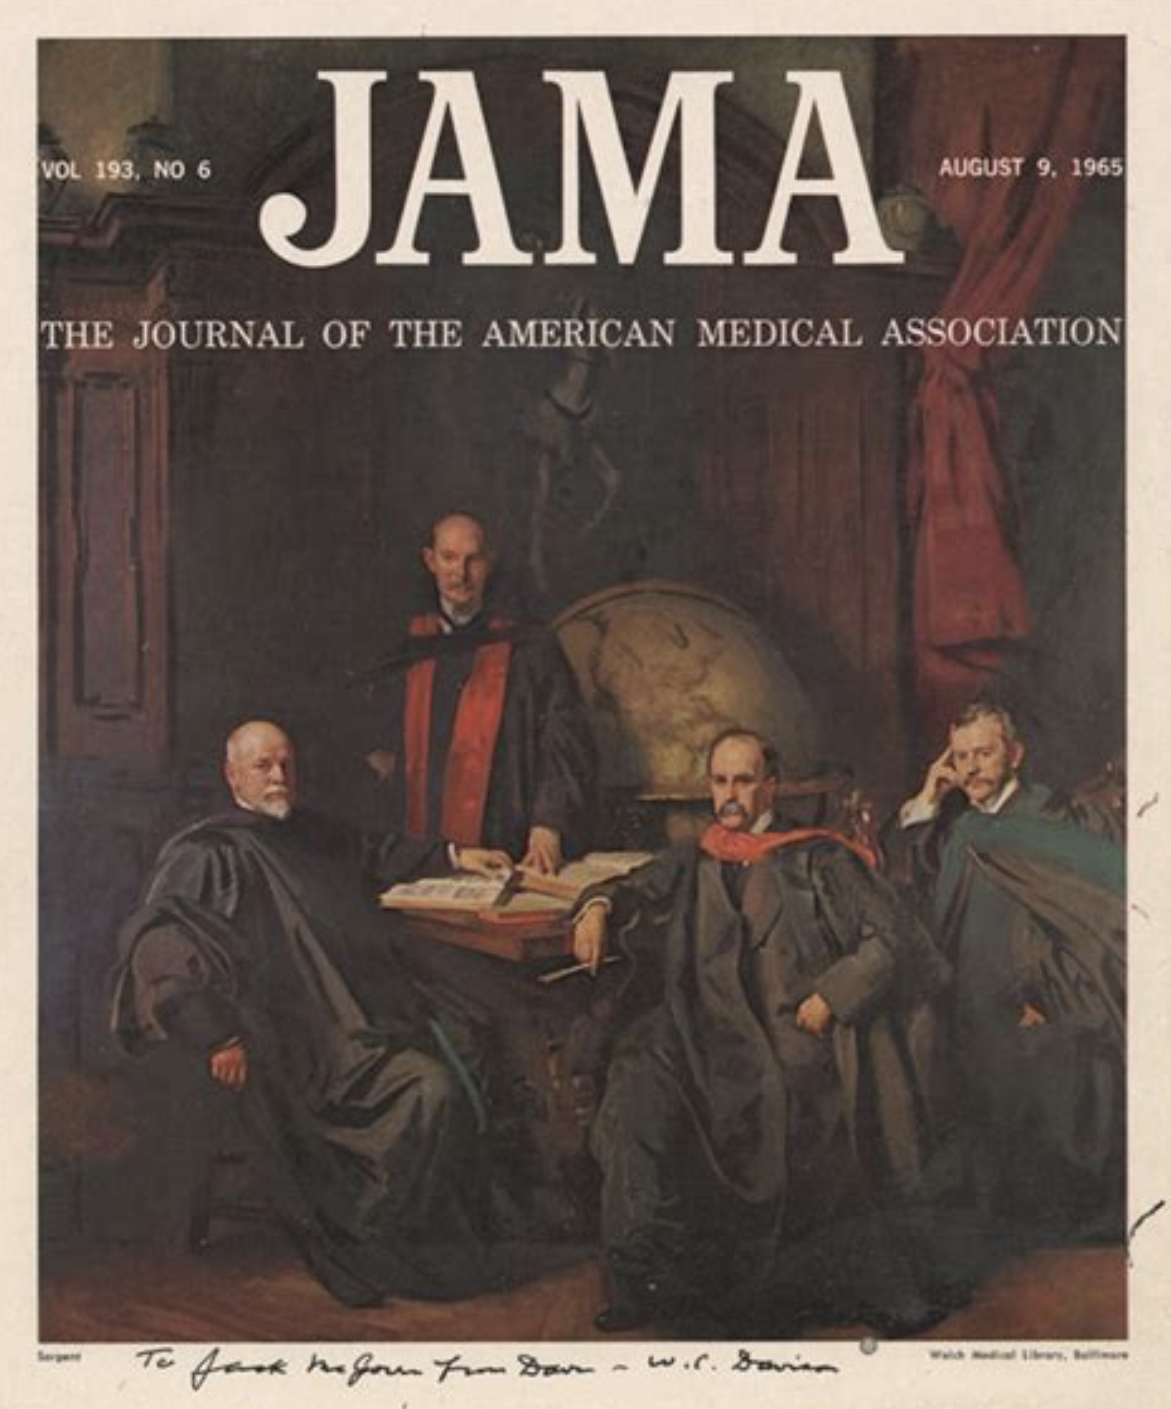 Cover of the Journal of the American Medical Association, Vol. 193, No 6, August 9, 1965